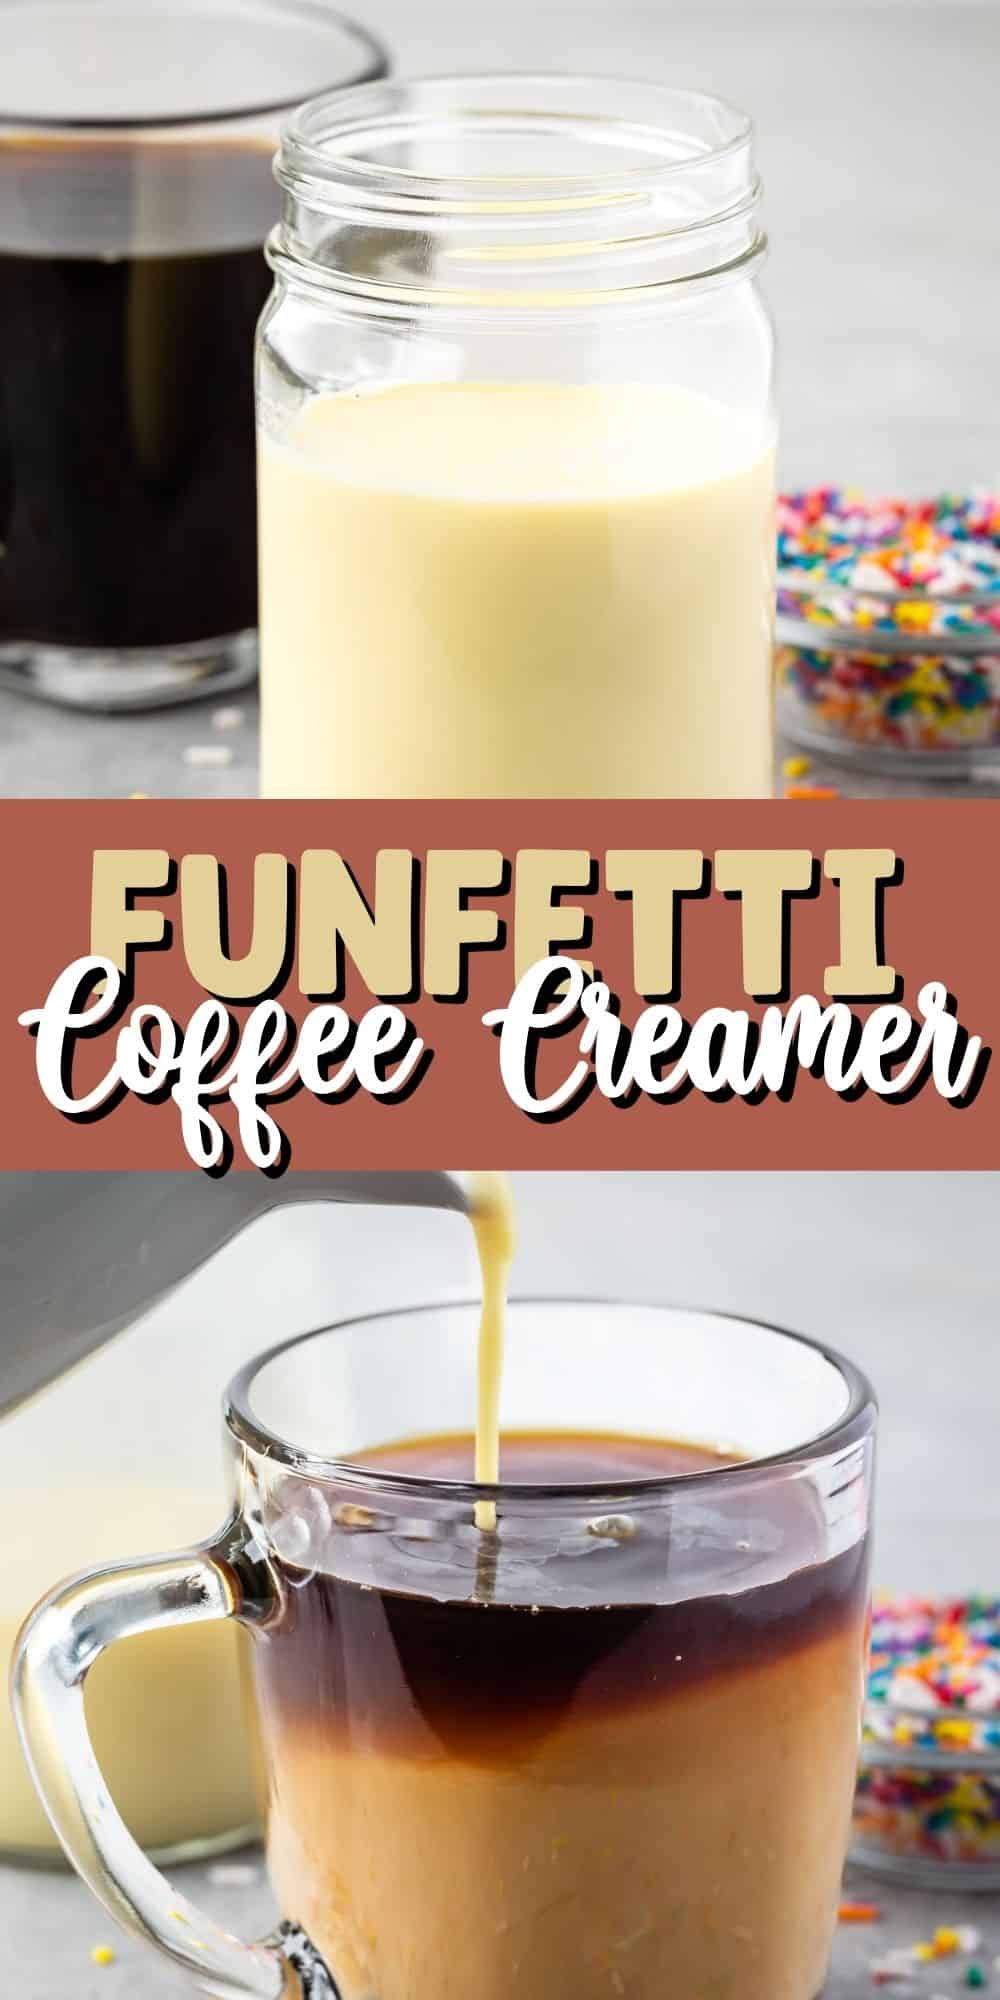 two photos of the coffee and the creamer with words on the images